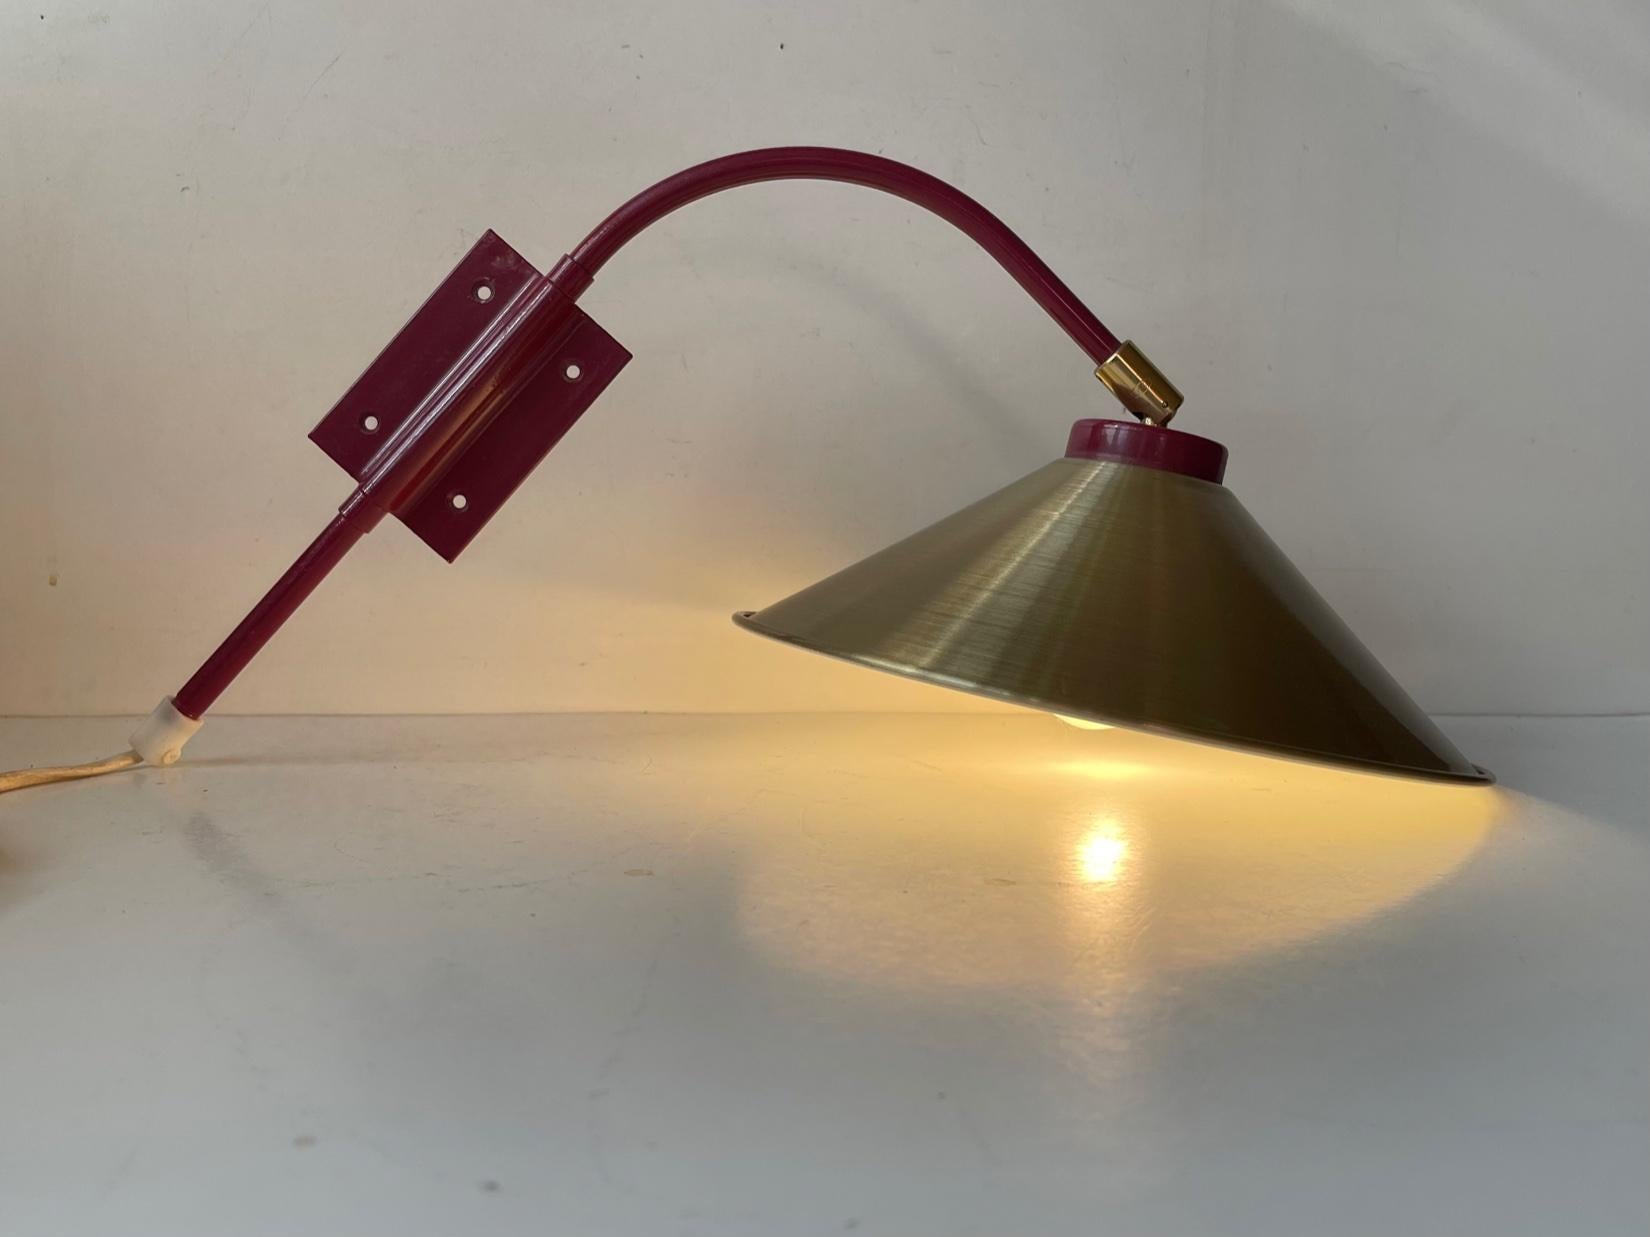 Adjustable wine red metal wall light with brass details and a brass alloy shade. It would make a great reading light. It can be adjusted from side to side and up/down at the shade. Anonymous scandinavian maker circa 1980. Measurements: H: 32, D: 24,